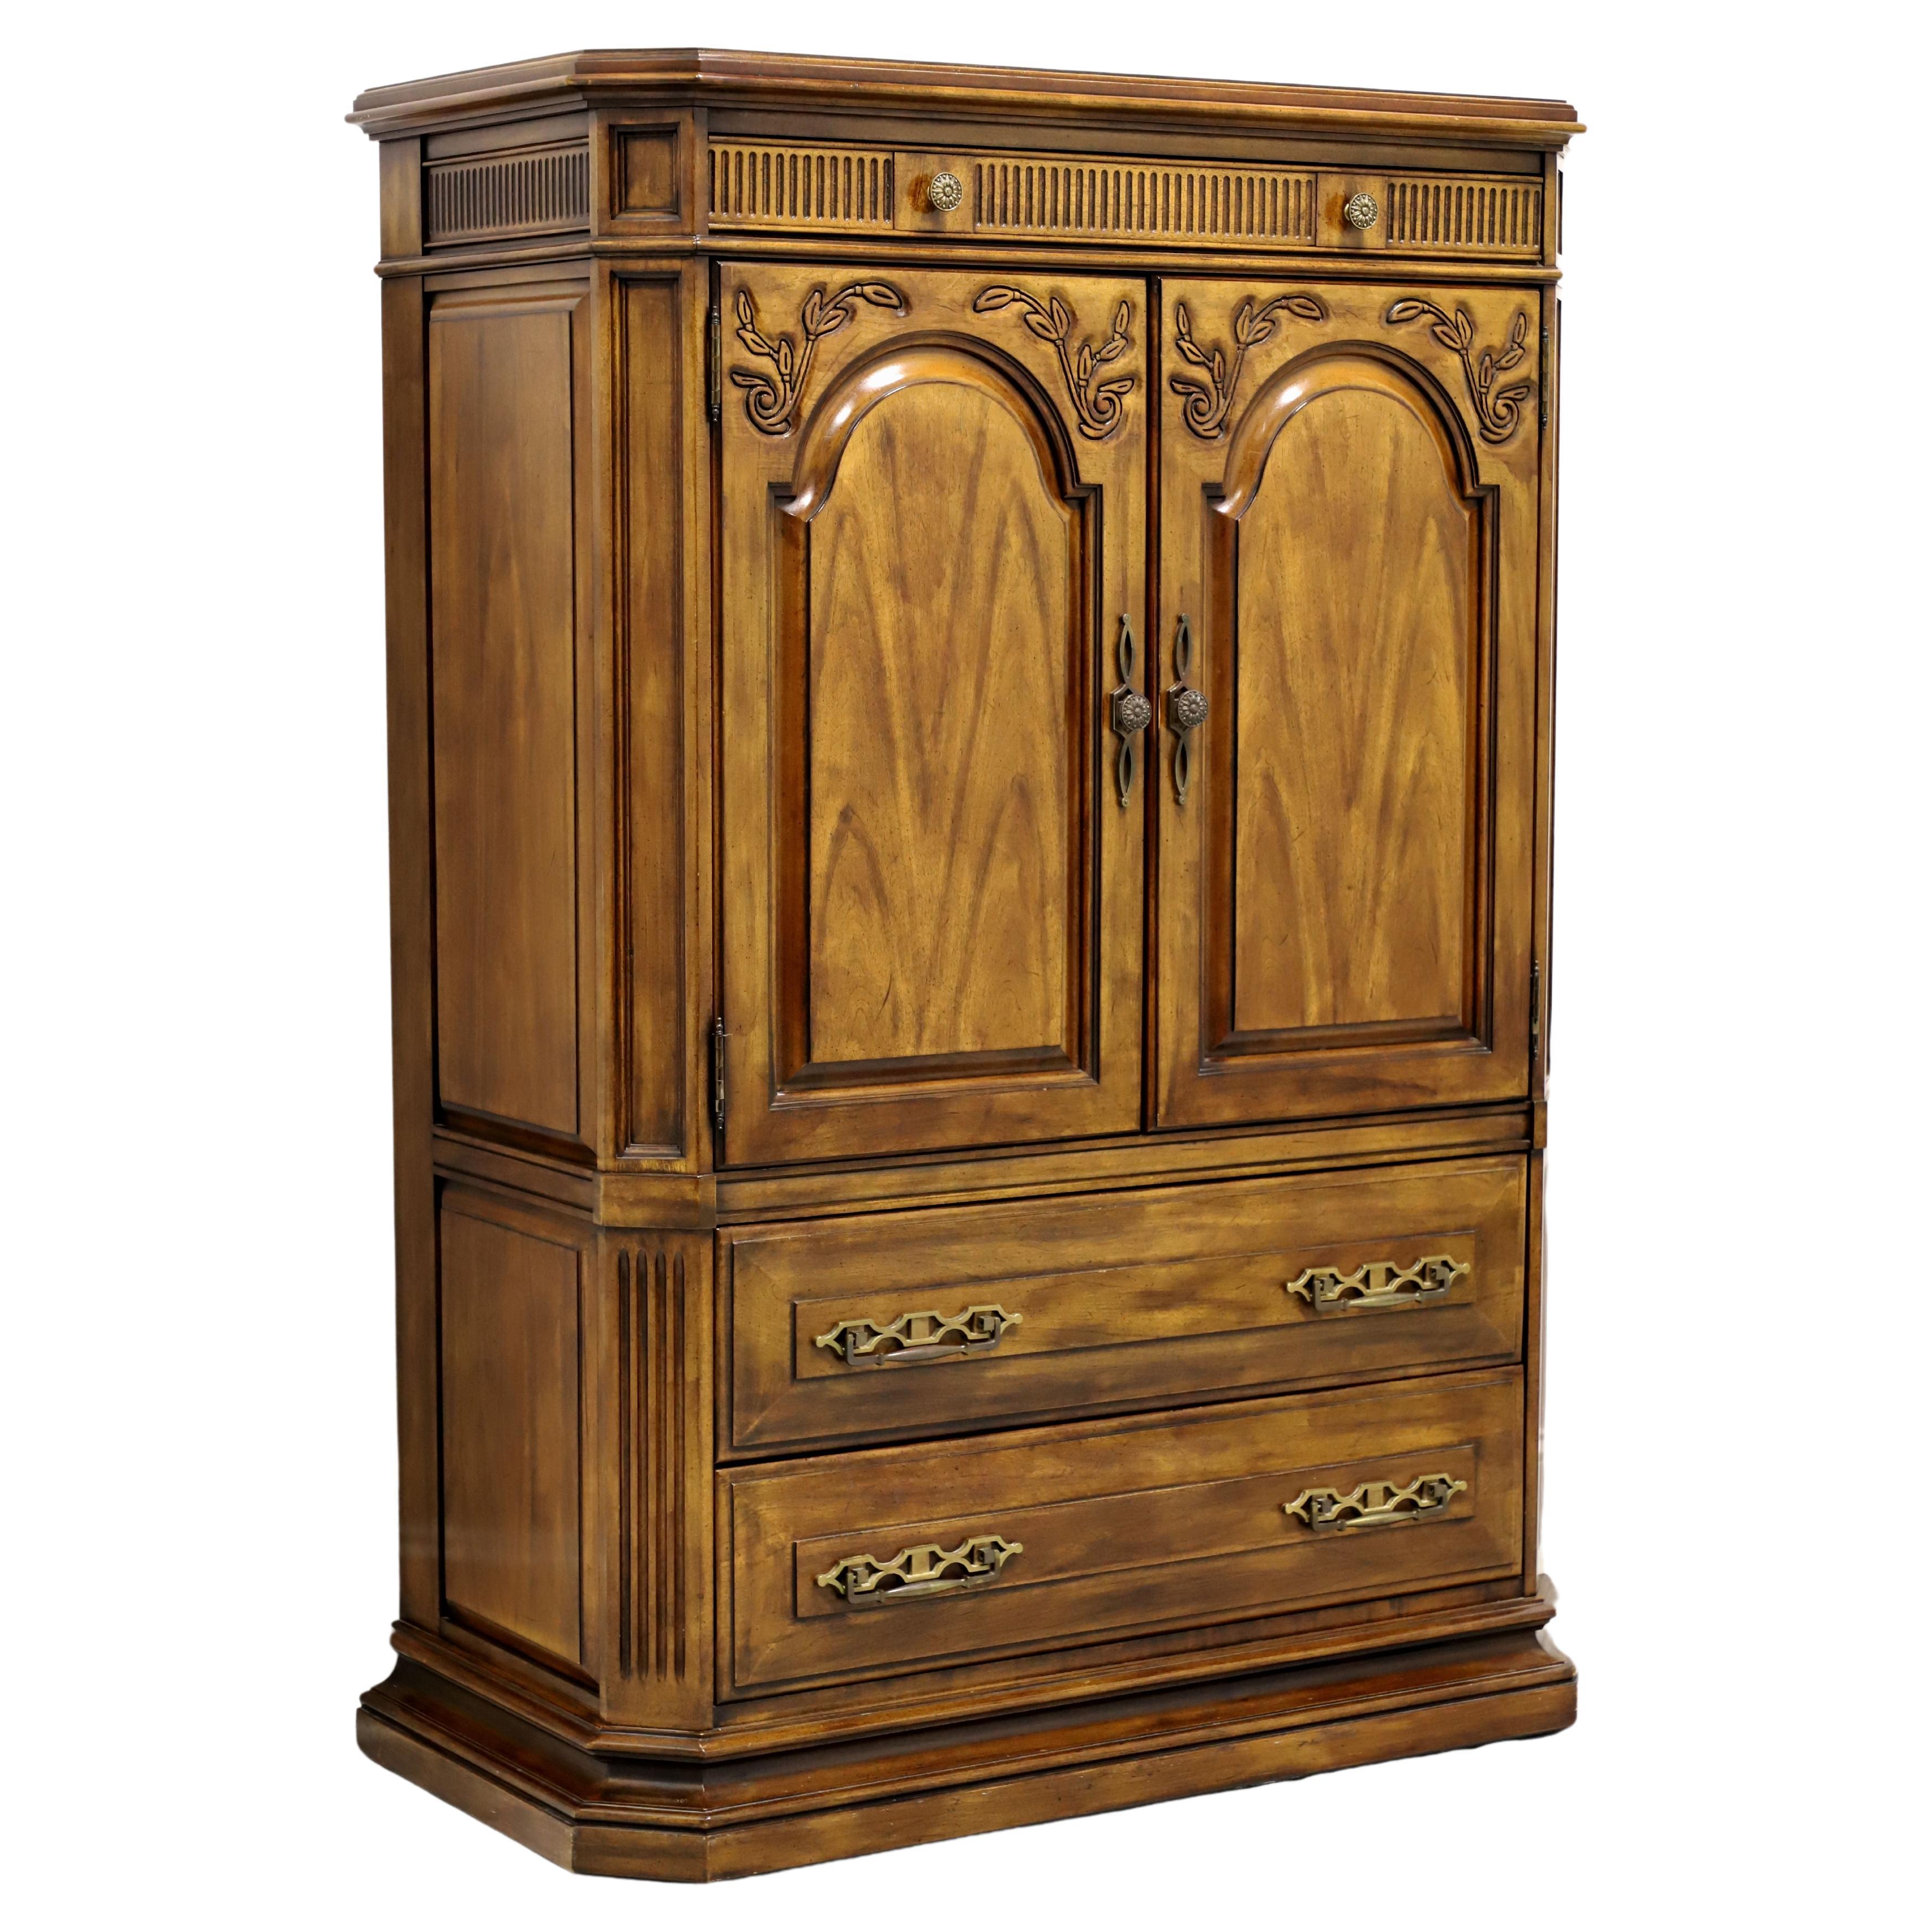 WHITE OF MEBANE Cherry French Country Style Gentleman's Chest